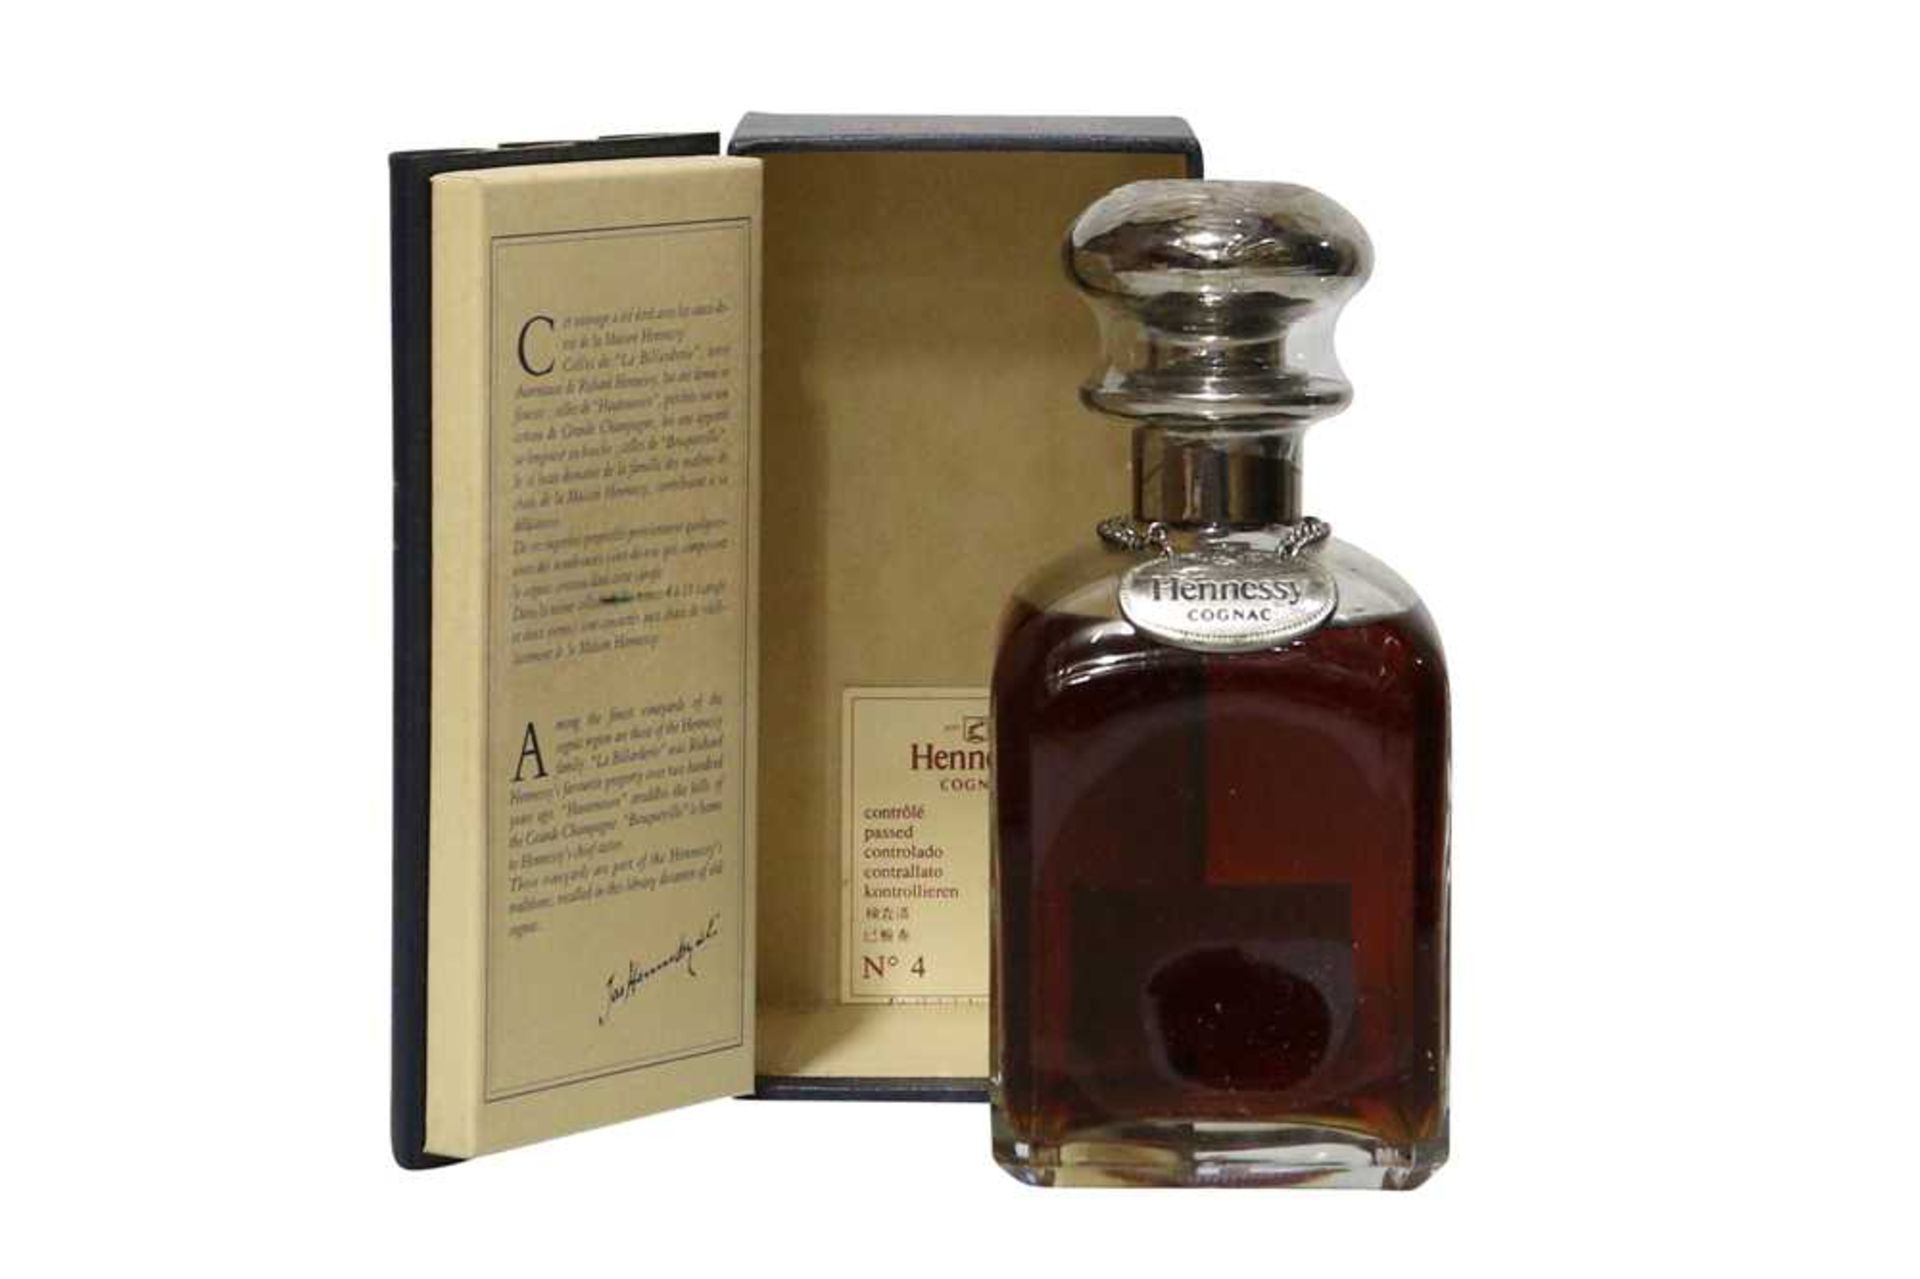 Hennessy, Cognac, Library Decanter, 40% vol, 70cl, one bottle in a book form case